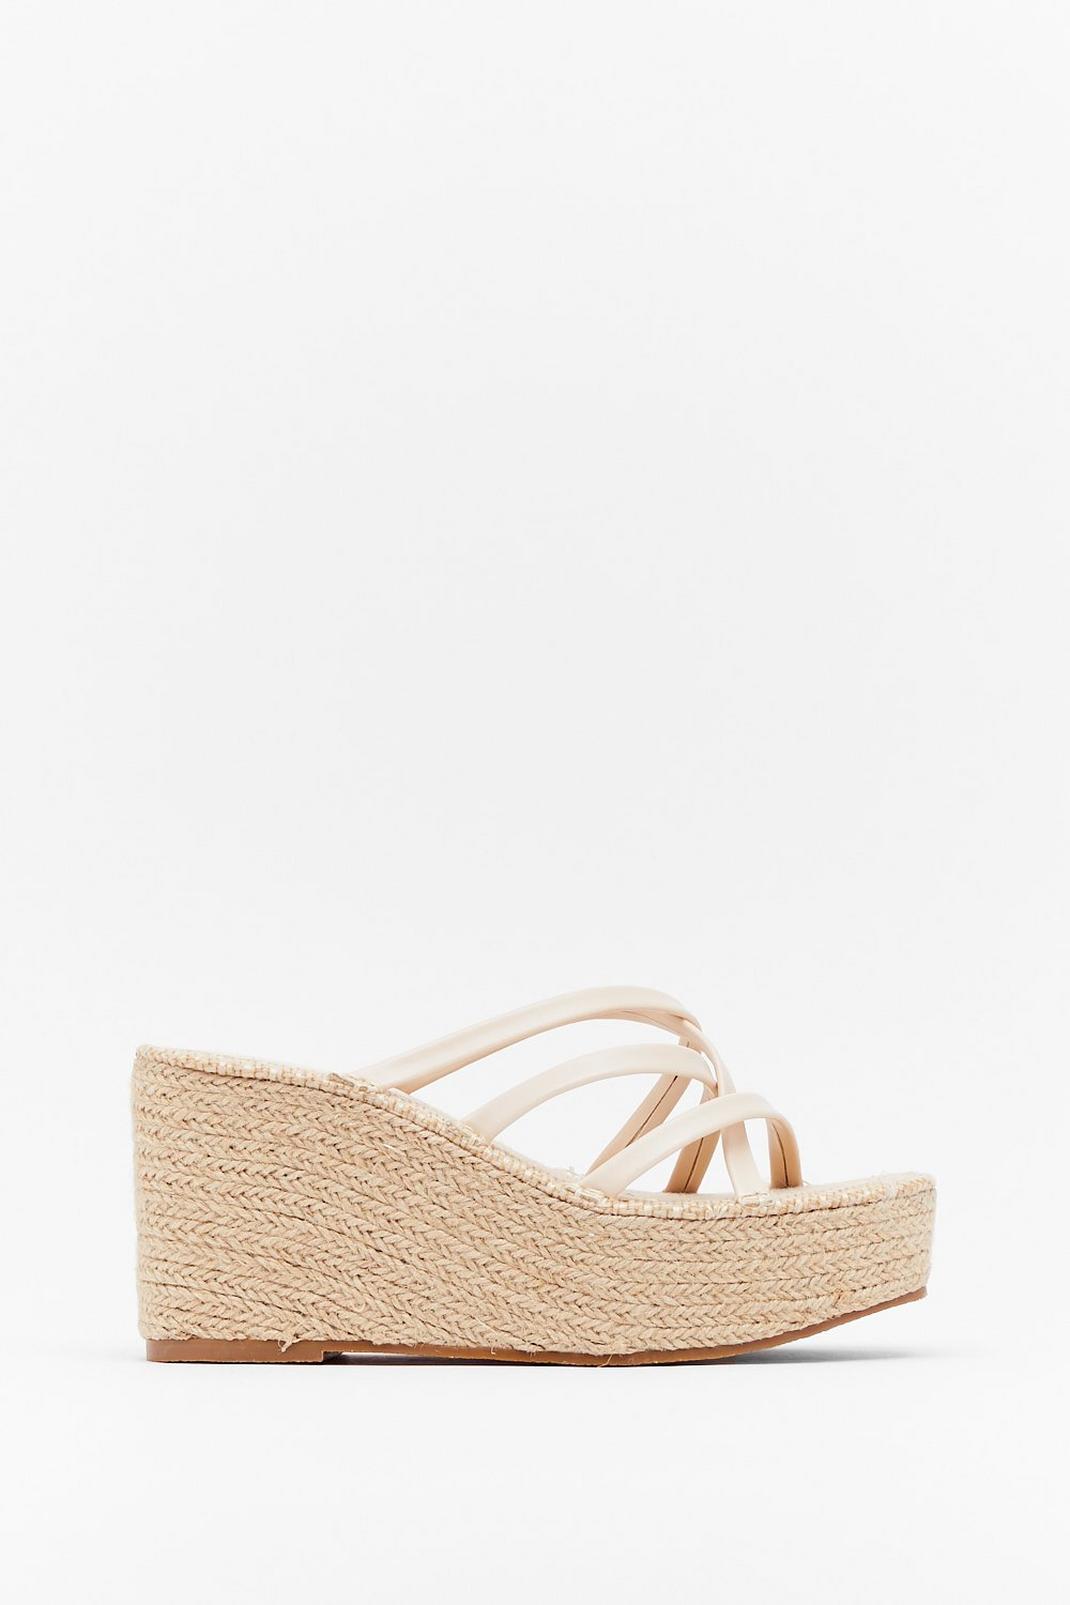 Up Hill Climb Espadrille Wedges | Nasty Gal